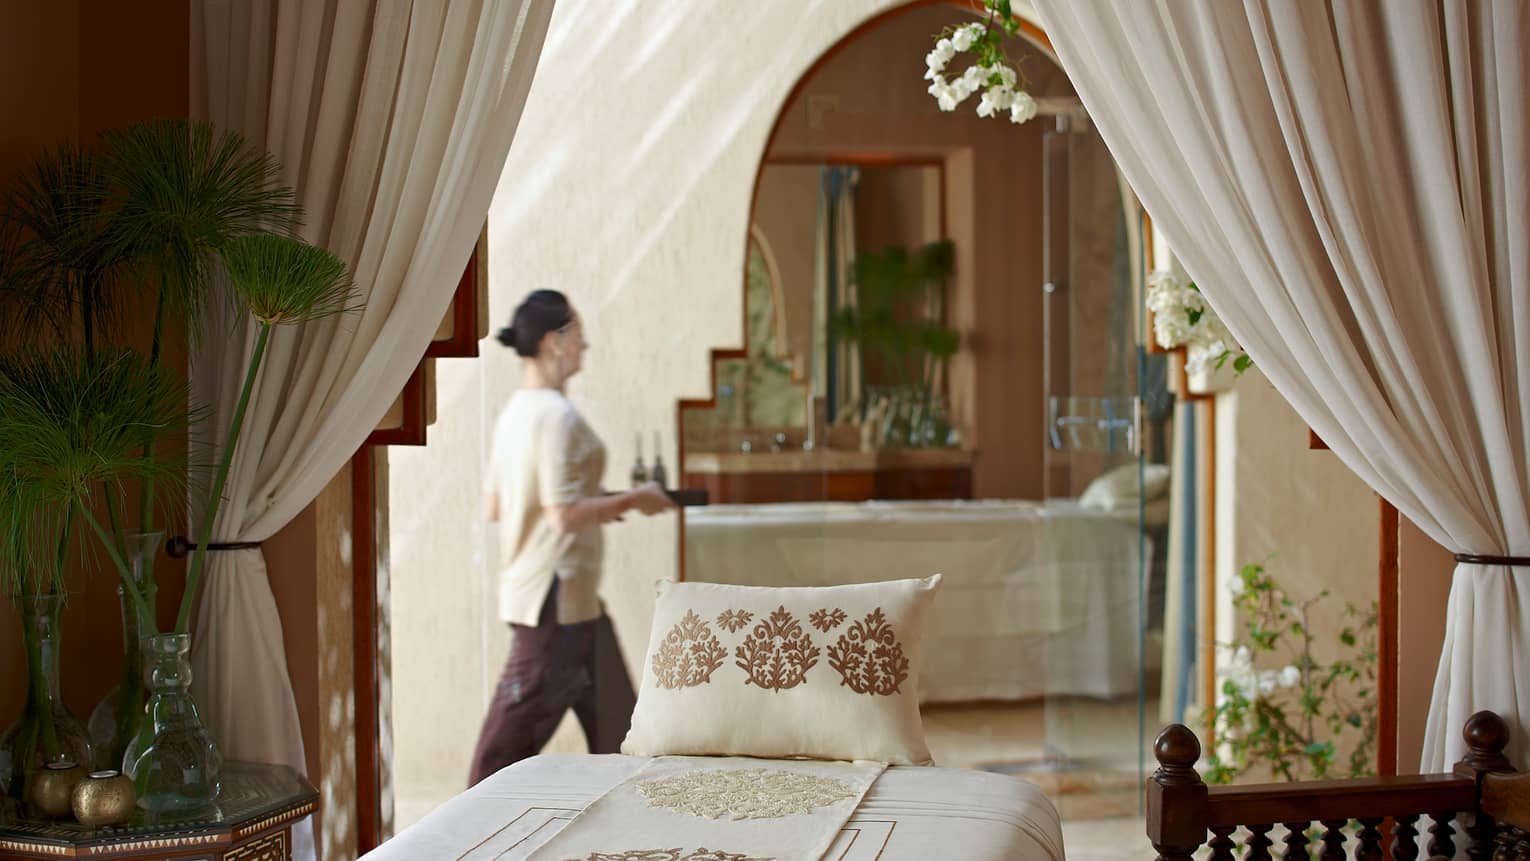 Woman with tray walks behind massage bed with embroidered pillow in spa